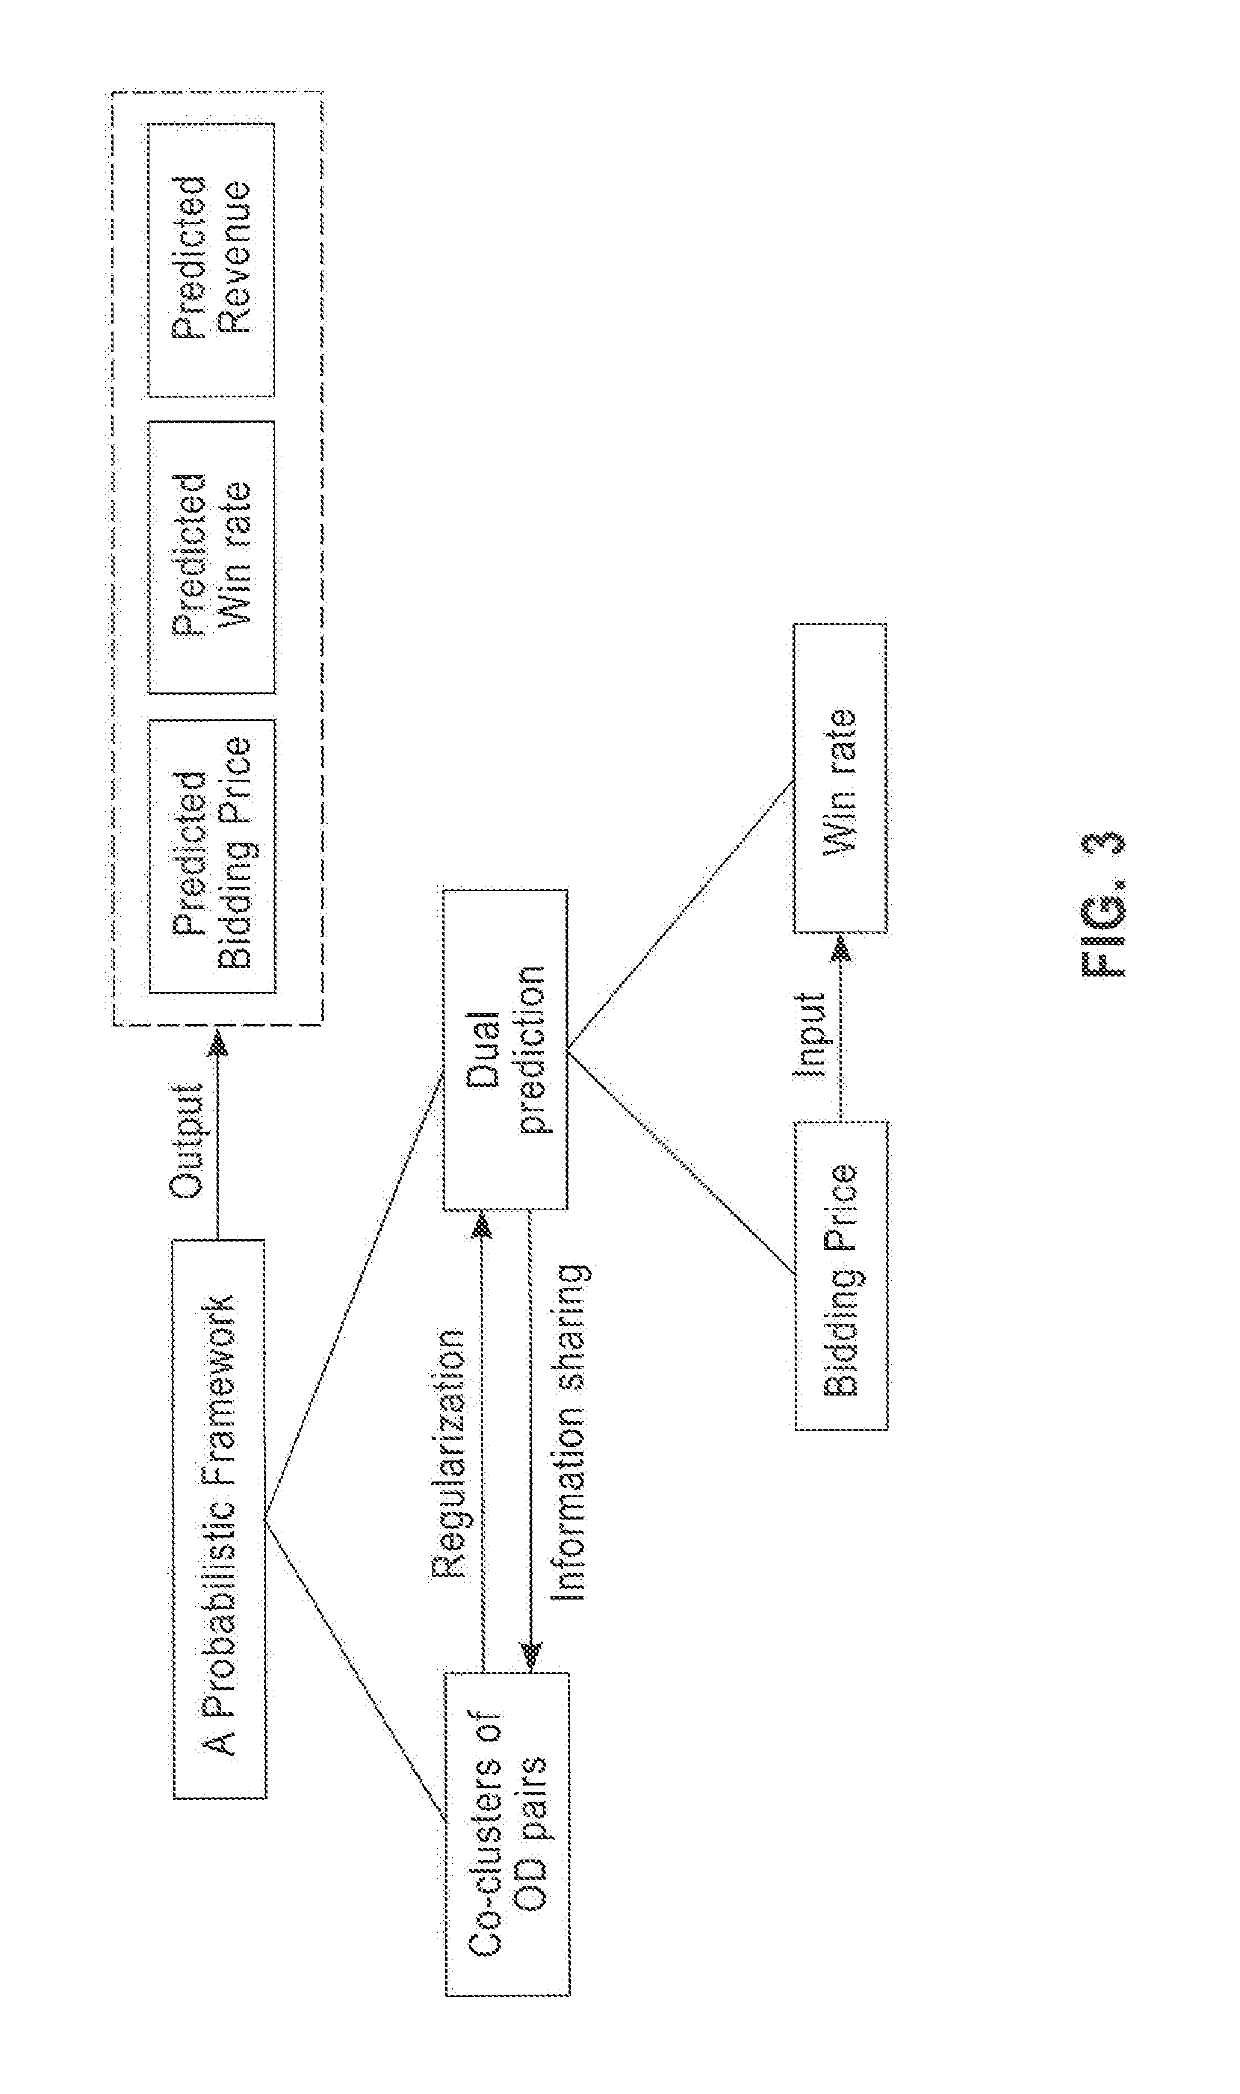 Management System and Predictive Modeling Method for Optimal Decision of Cargo Bidding Price